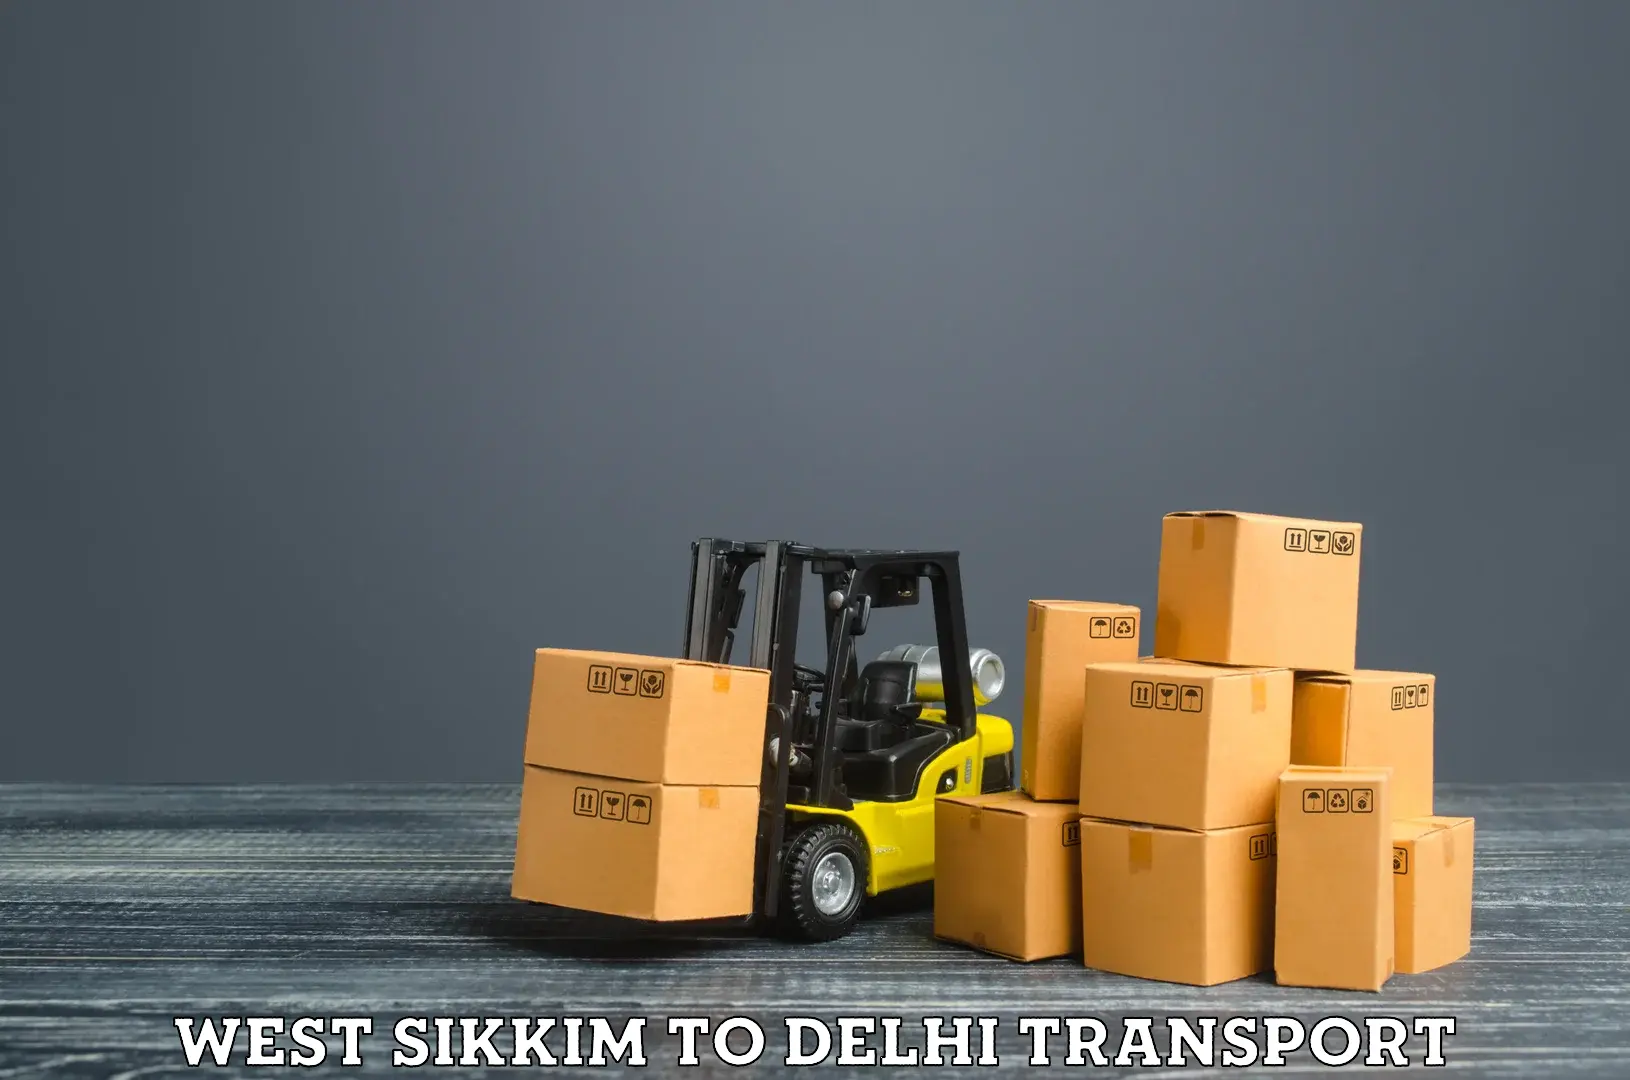 Furniture transport service West Sikkim to NCR